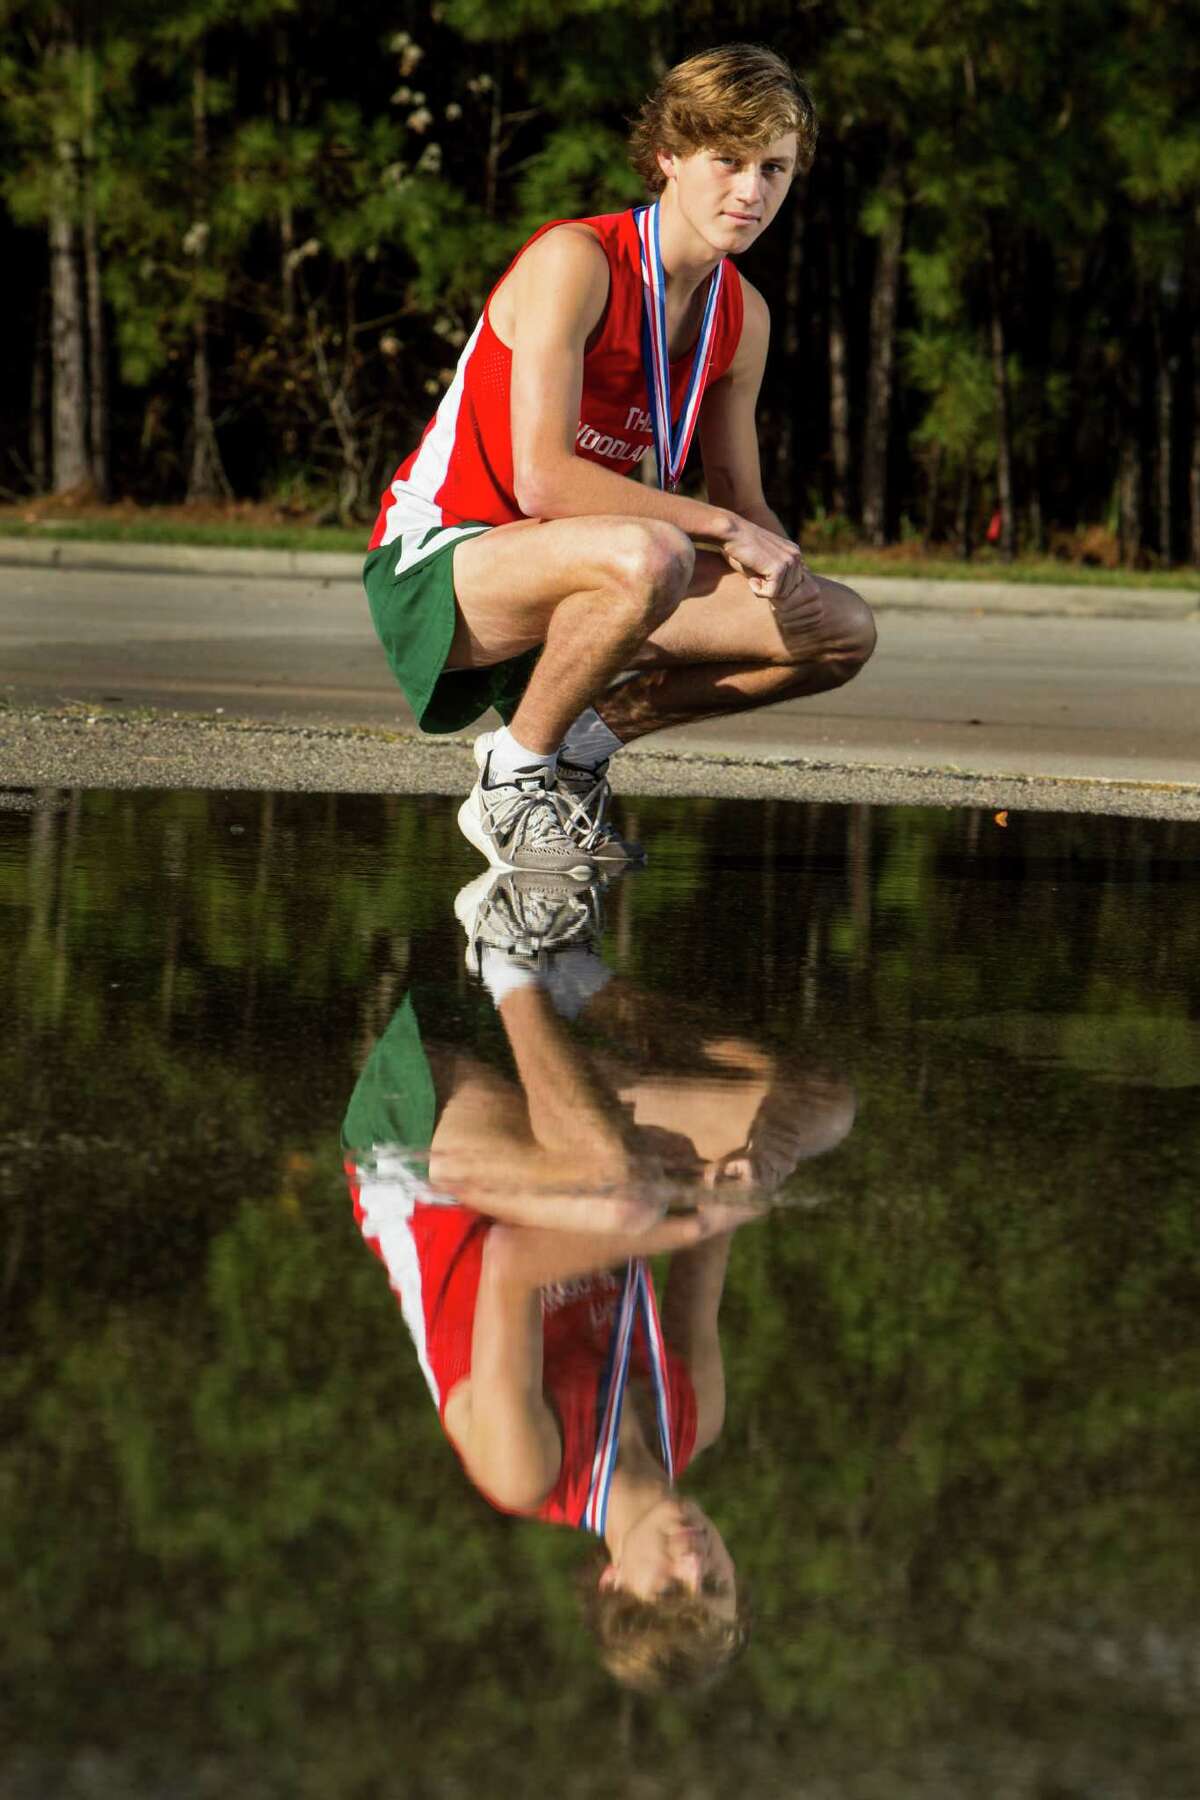 The Woodlands High School senior William Hunsdale poses for a portrait on Wednesday, Nov. 23, 2016, in Houston. Hunsday is the Greater Houston Cross Country Boys Runner of the Year. ( Brett Coomer / Houston Chronicle )